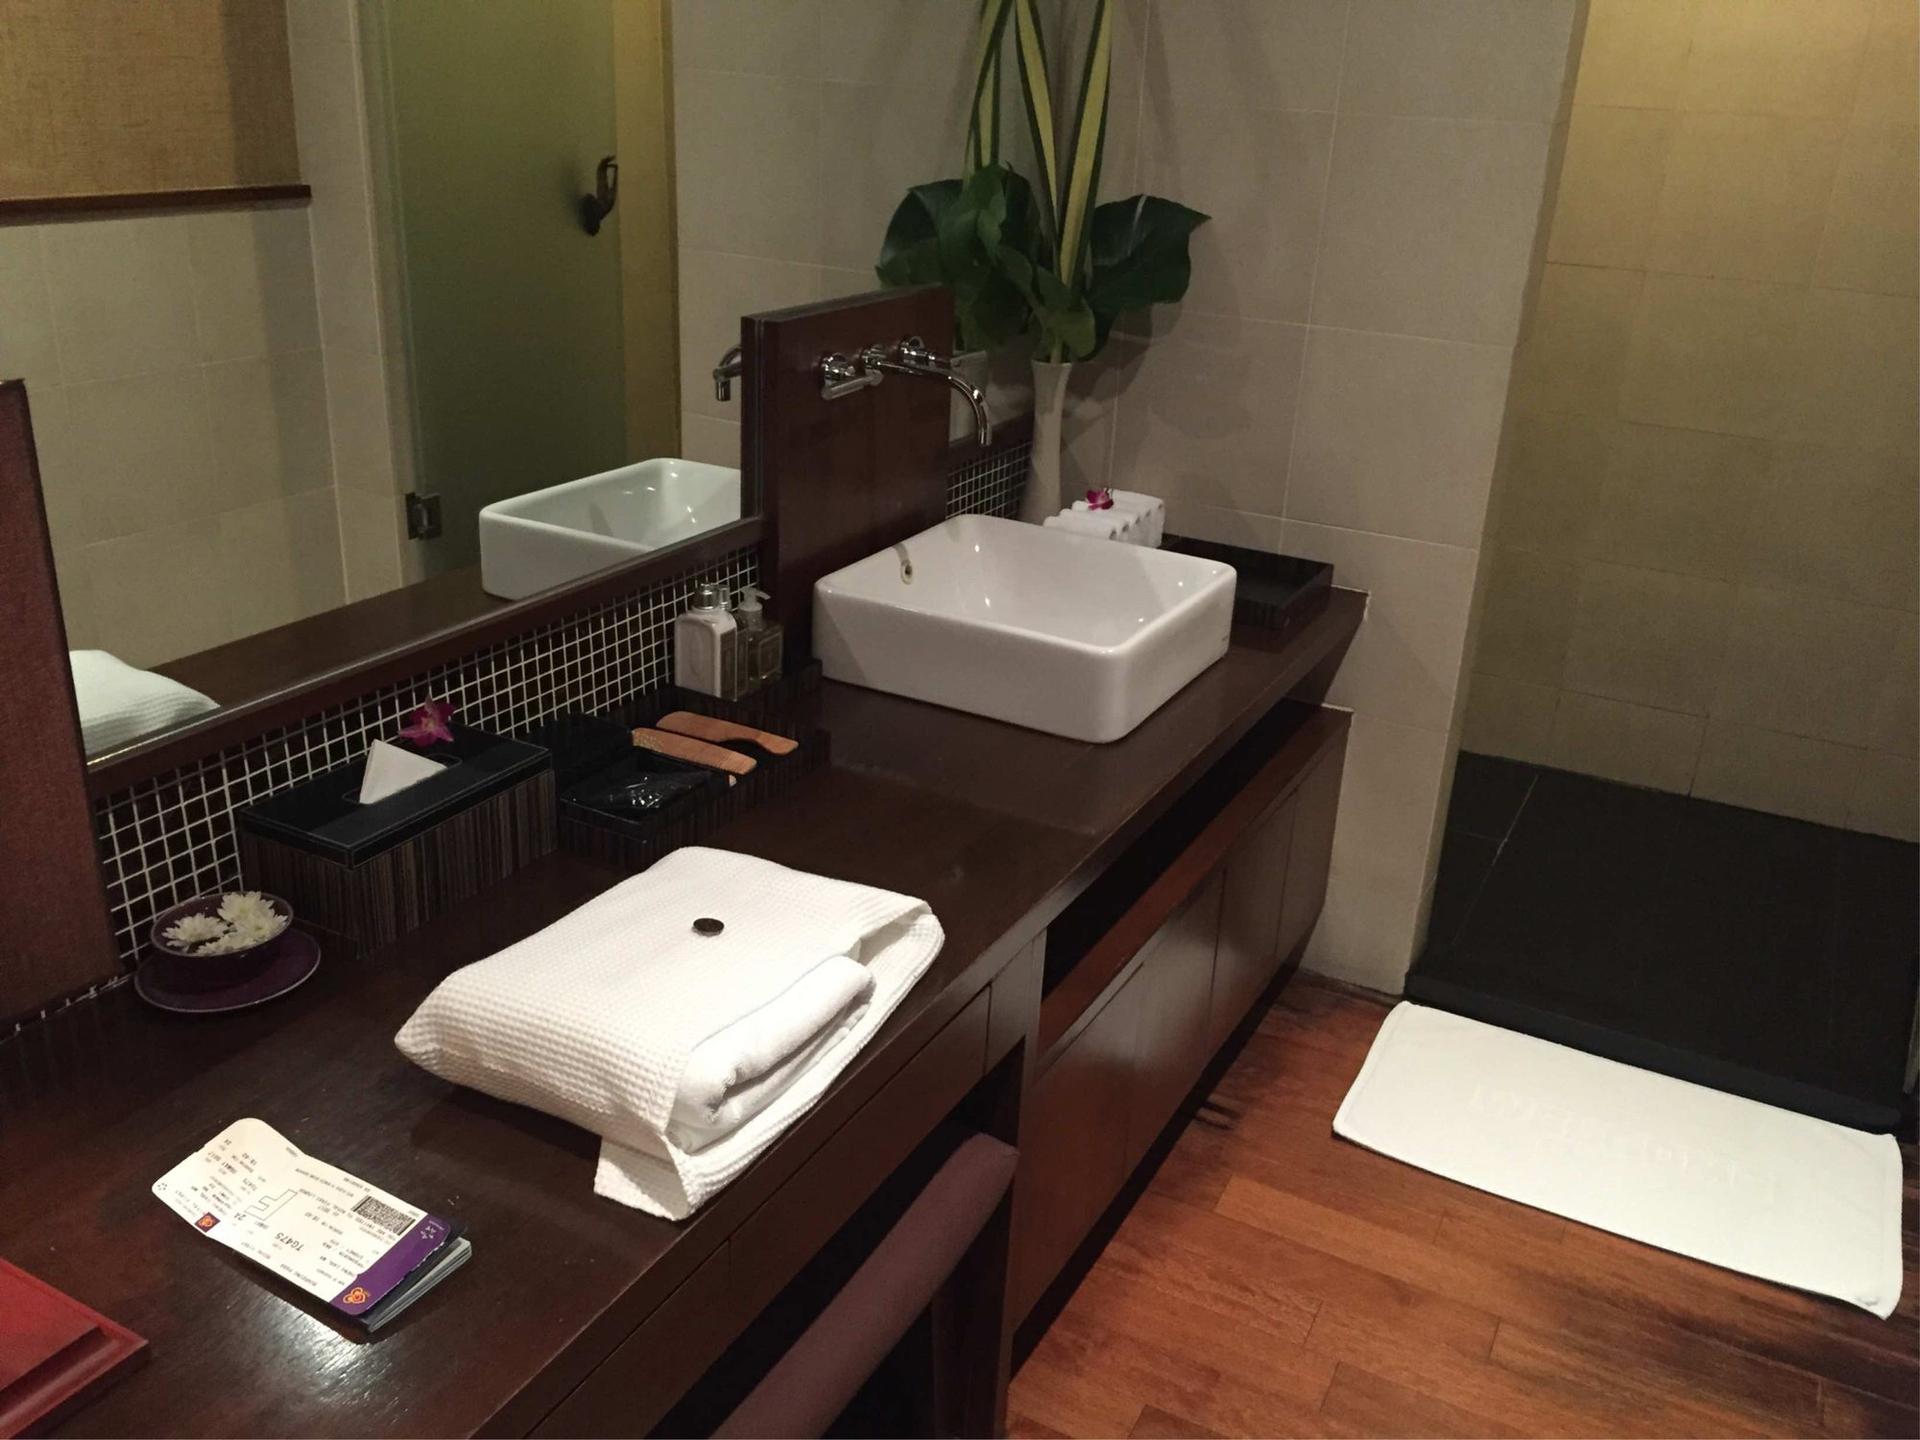 Thai Airways Royal Orchid Spa  image 24 of 25